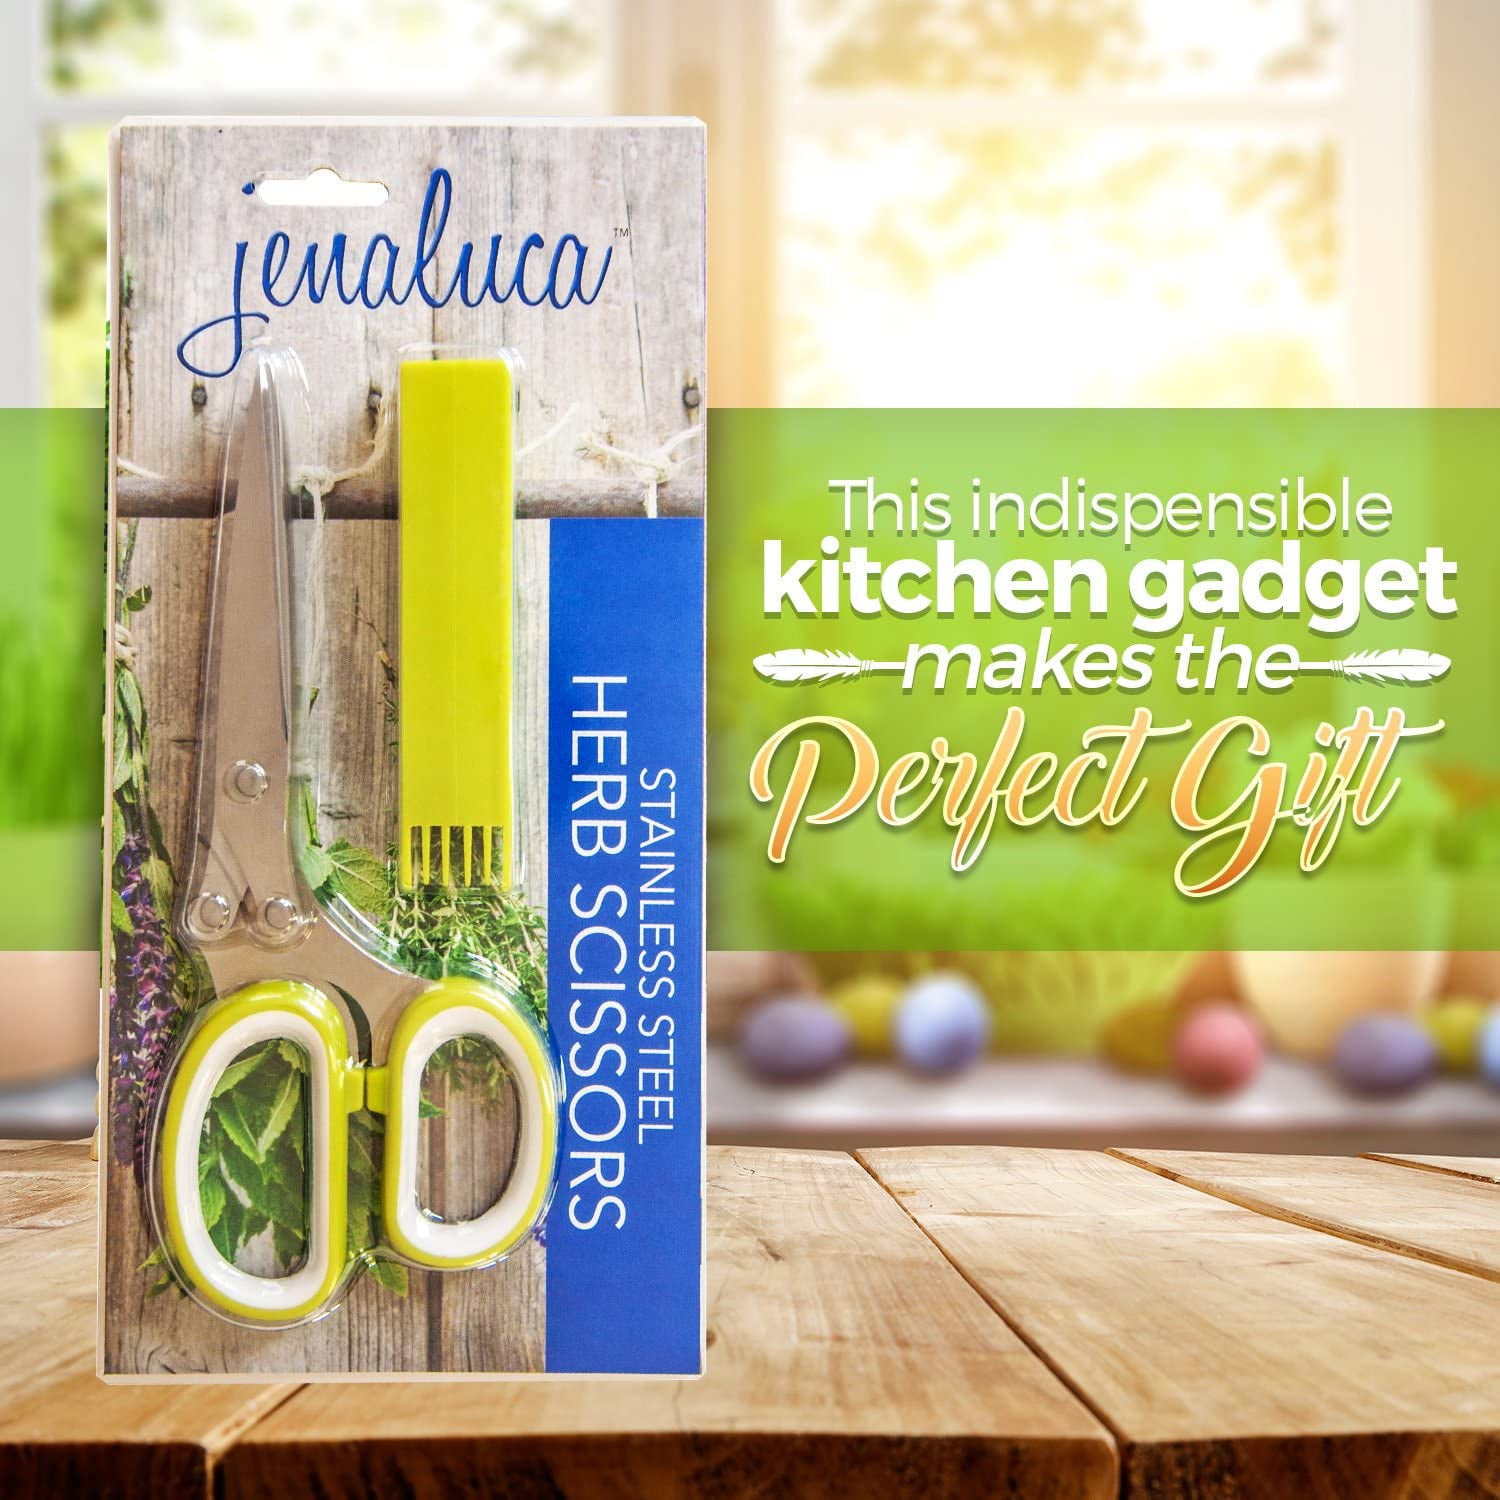 Jenaluca Herb Scissors with 5 Blades and Safety Cover - Cut, Chop & Mince  Fresh Herbs & Leafy Greens - Stainless Steel Kitchen Shears with Cleaning